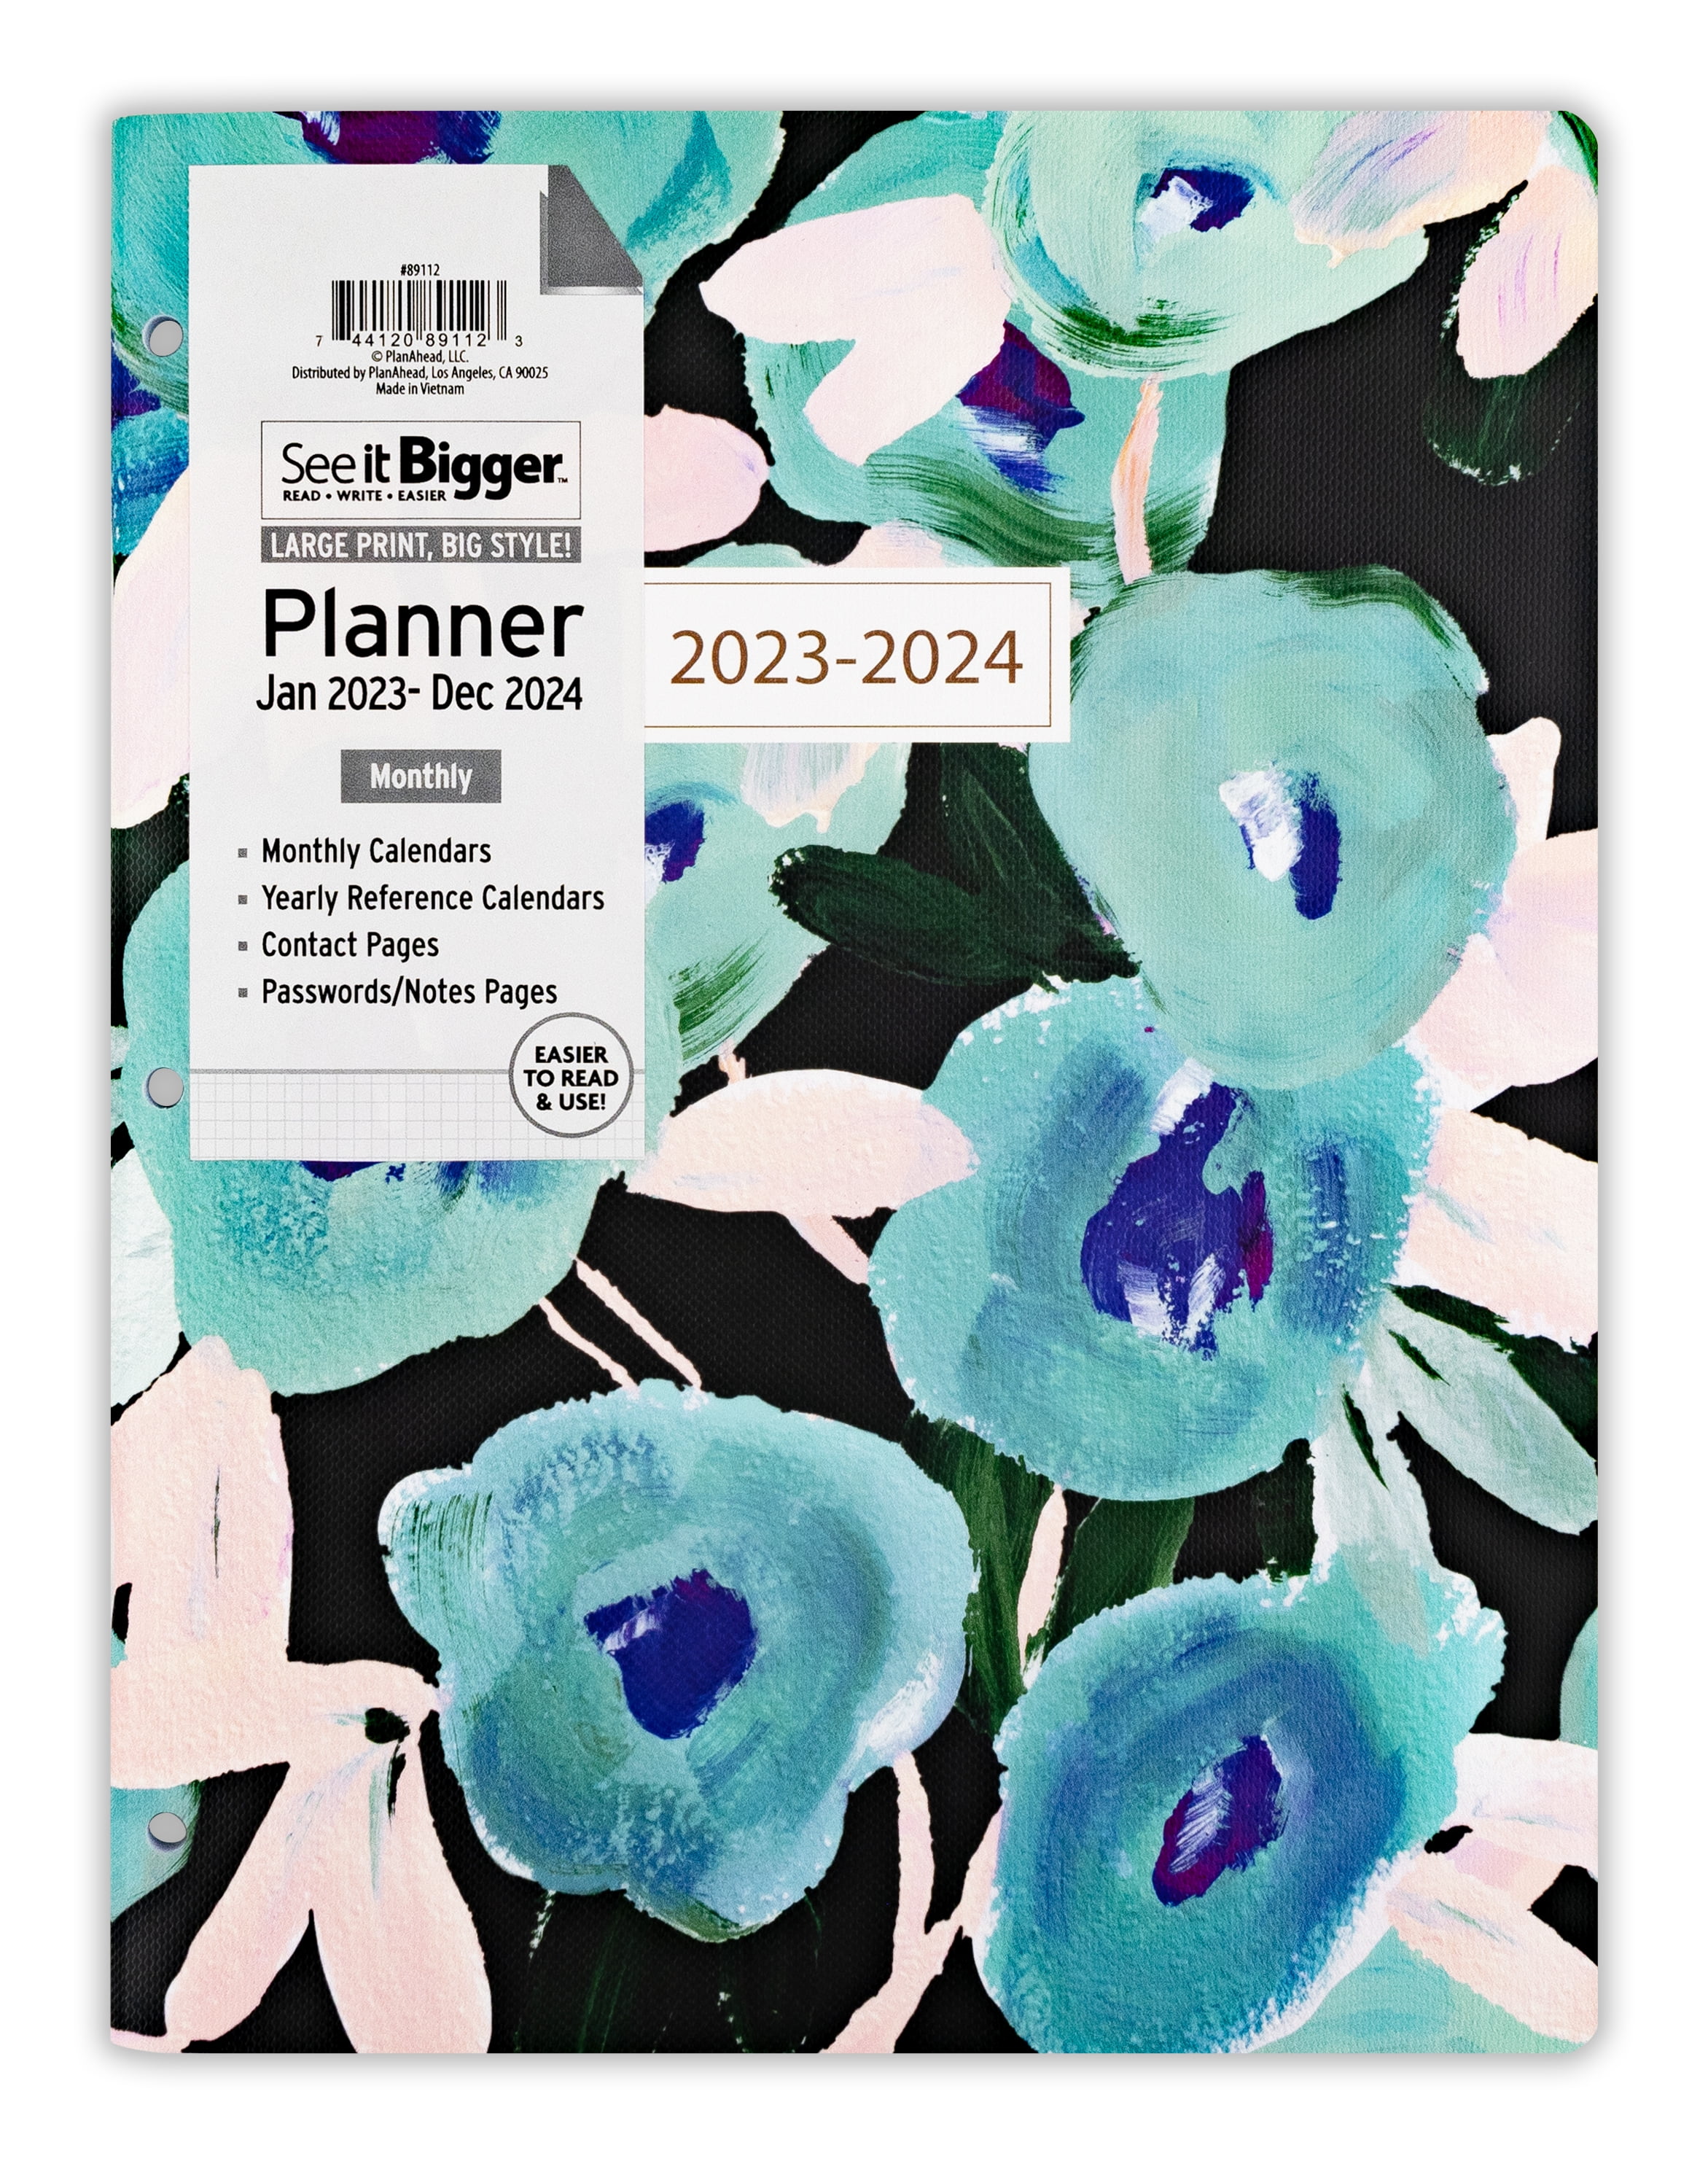 see-it-bigger-monthly-planner-january-2023-december-2024-8-5-x-11